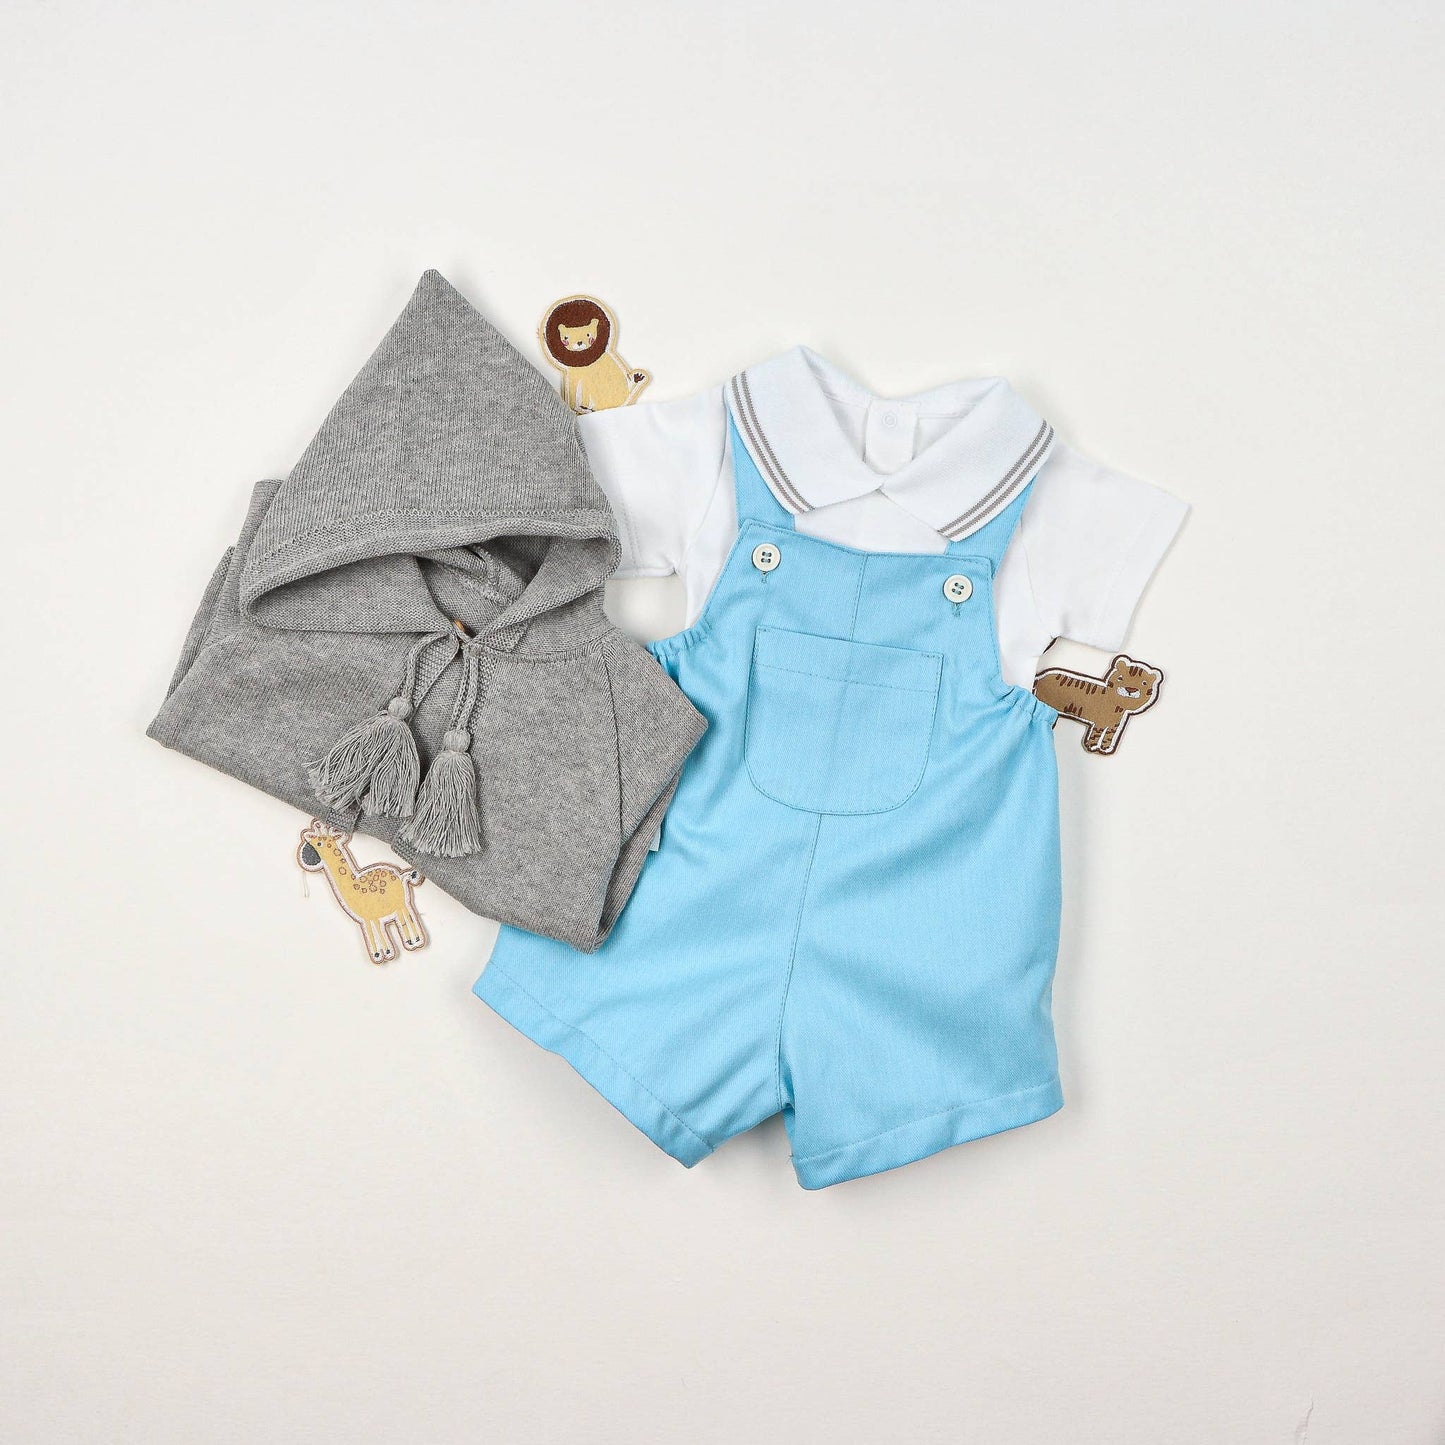 Cotton Baby Bodysuit Onesie with Polo-Style Collar: 12-18M / Long Sleeve / Light Blue